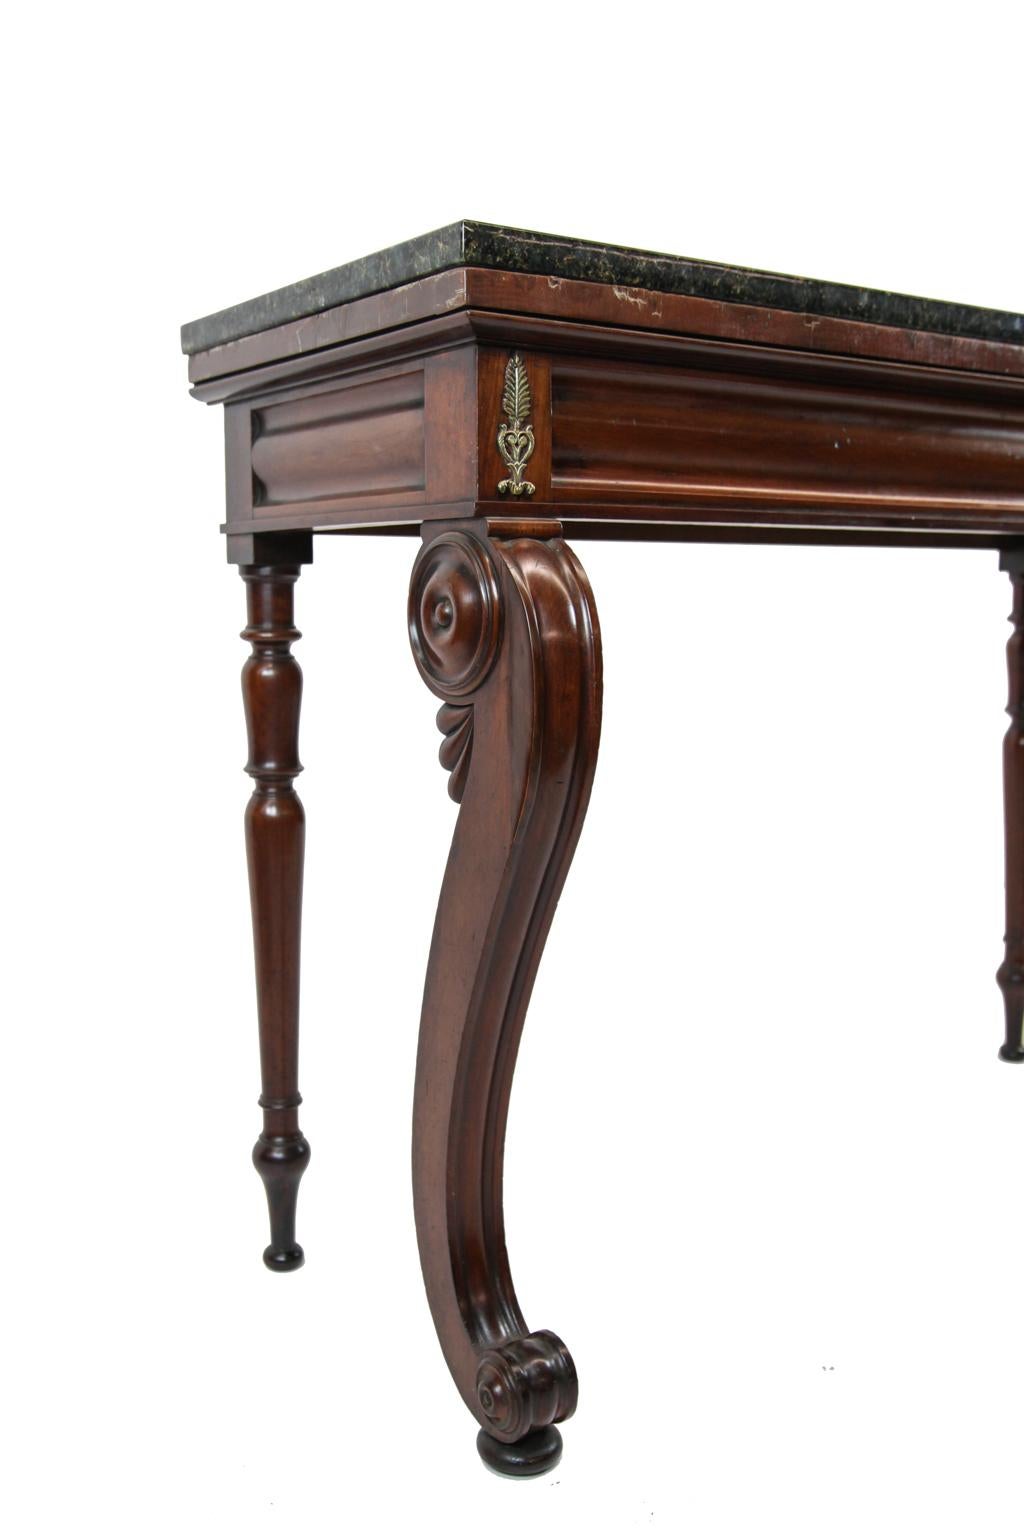 19th century William 4th console table in mahogany, with ubatuba granite top, convex shaped frieze with brass ornaments at the corners, front saber shaped molded legs with large circular medallions on either sides with smaller ones at the feet,